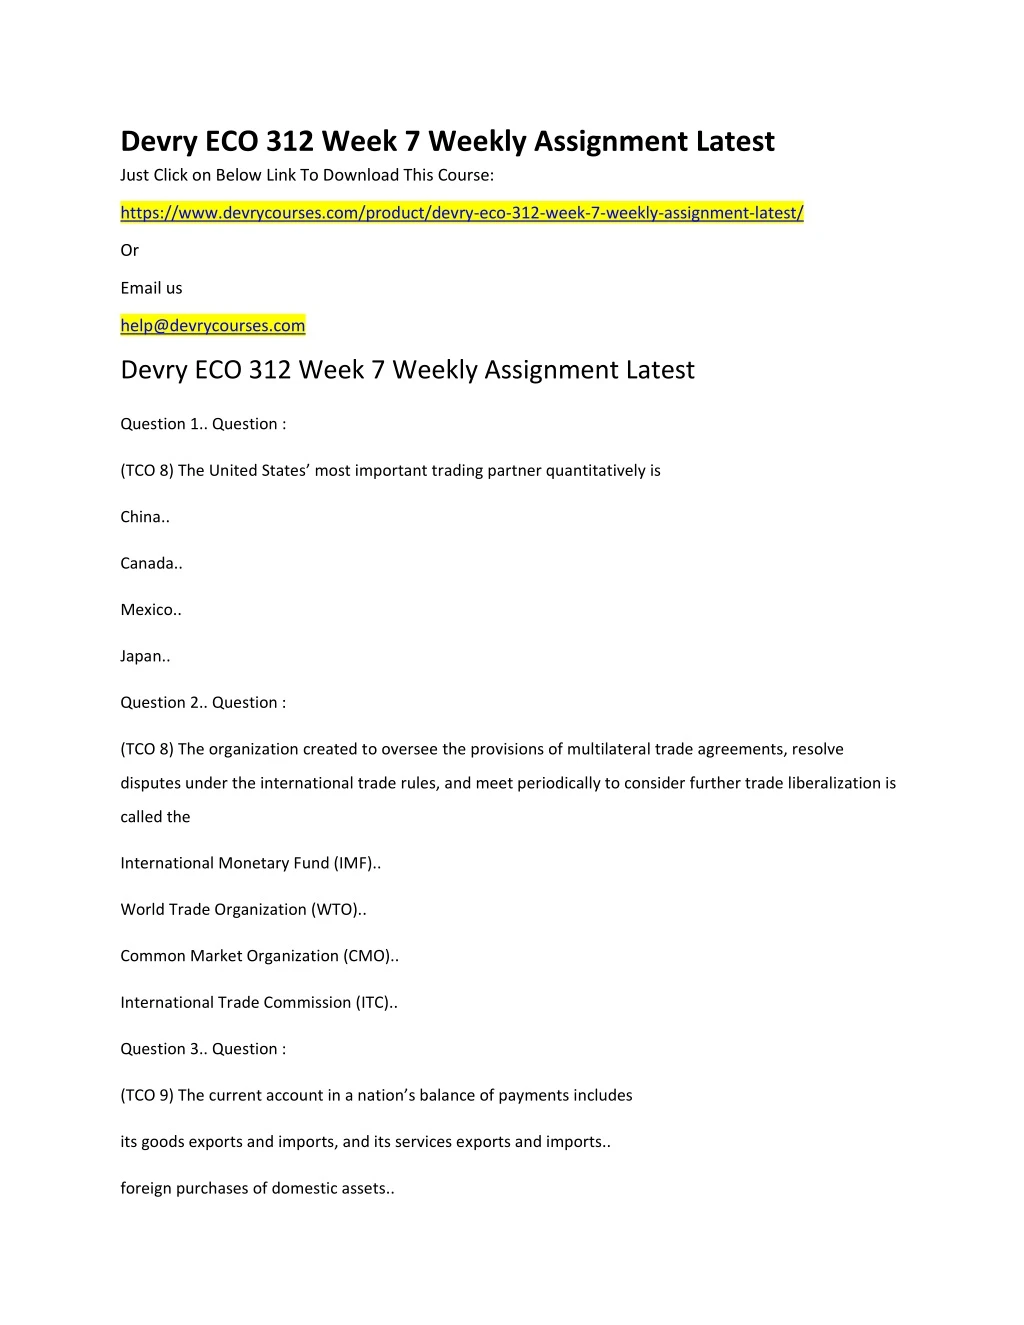 devry eco 312 week 7 weekly assignment latest